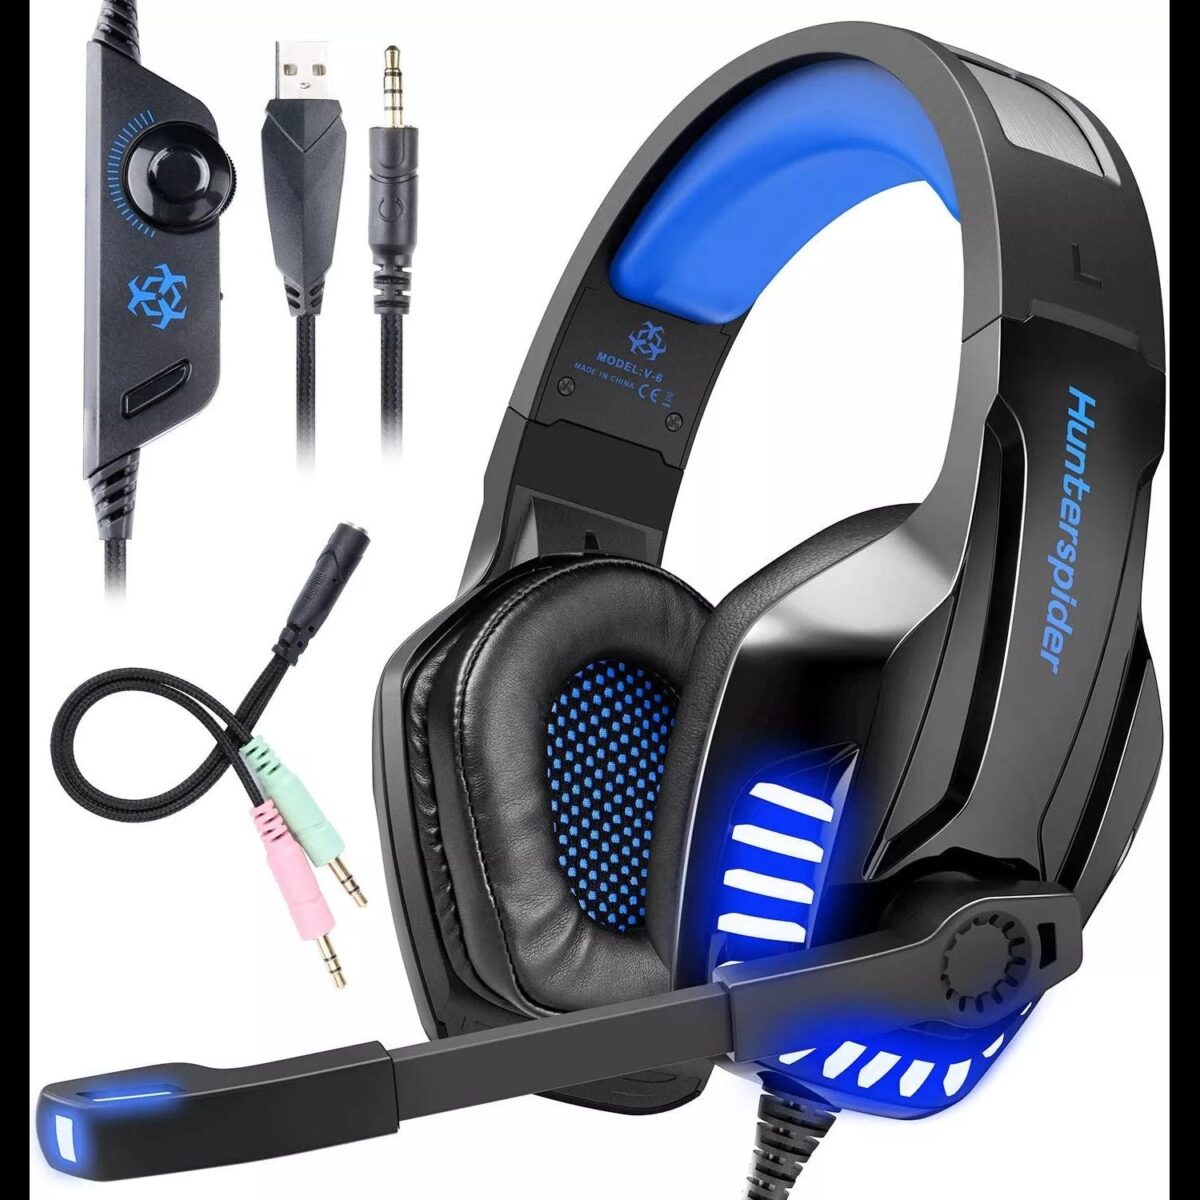 Hunterspider Pro Gaming Headset 4D Surrounded Stereo Sound 3.5mm 4Pin with Noise Canceling Mic & LED Light - Supports Mobiles, Tablets, Laptops, PS4, Xbox One – Model: V-6